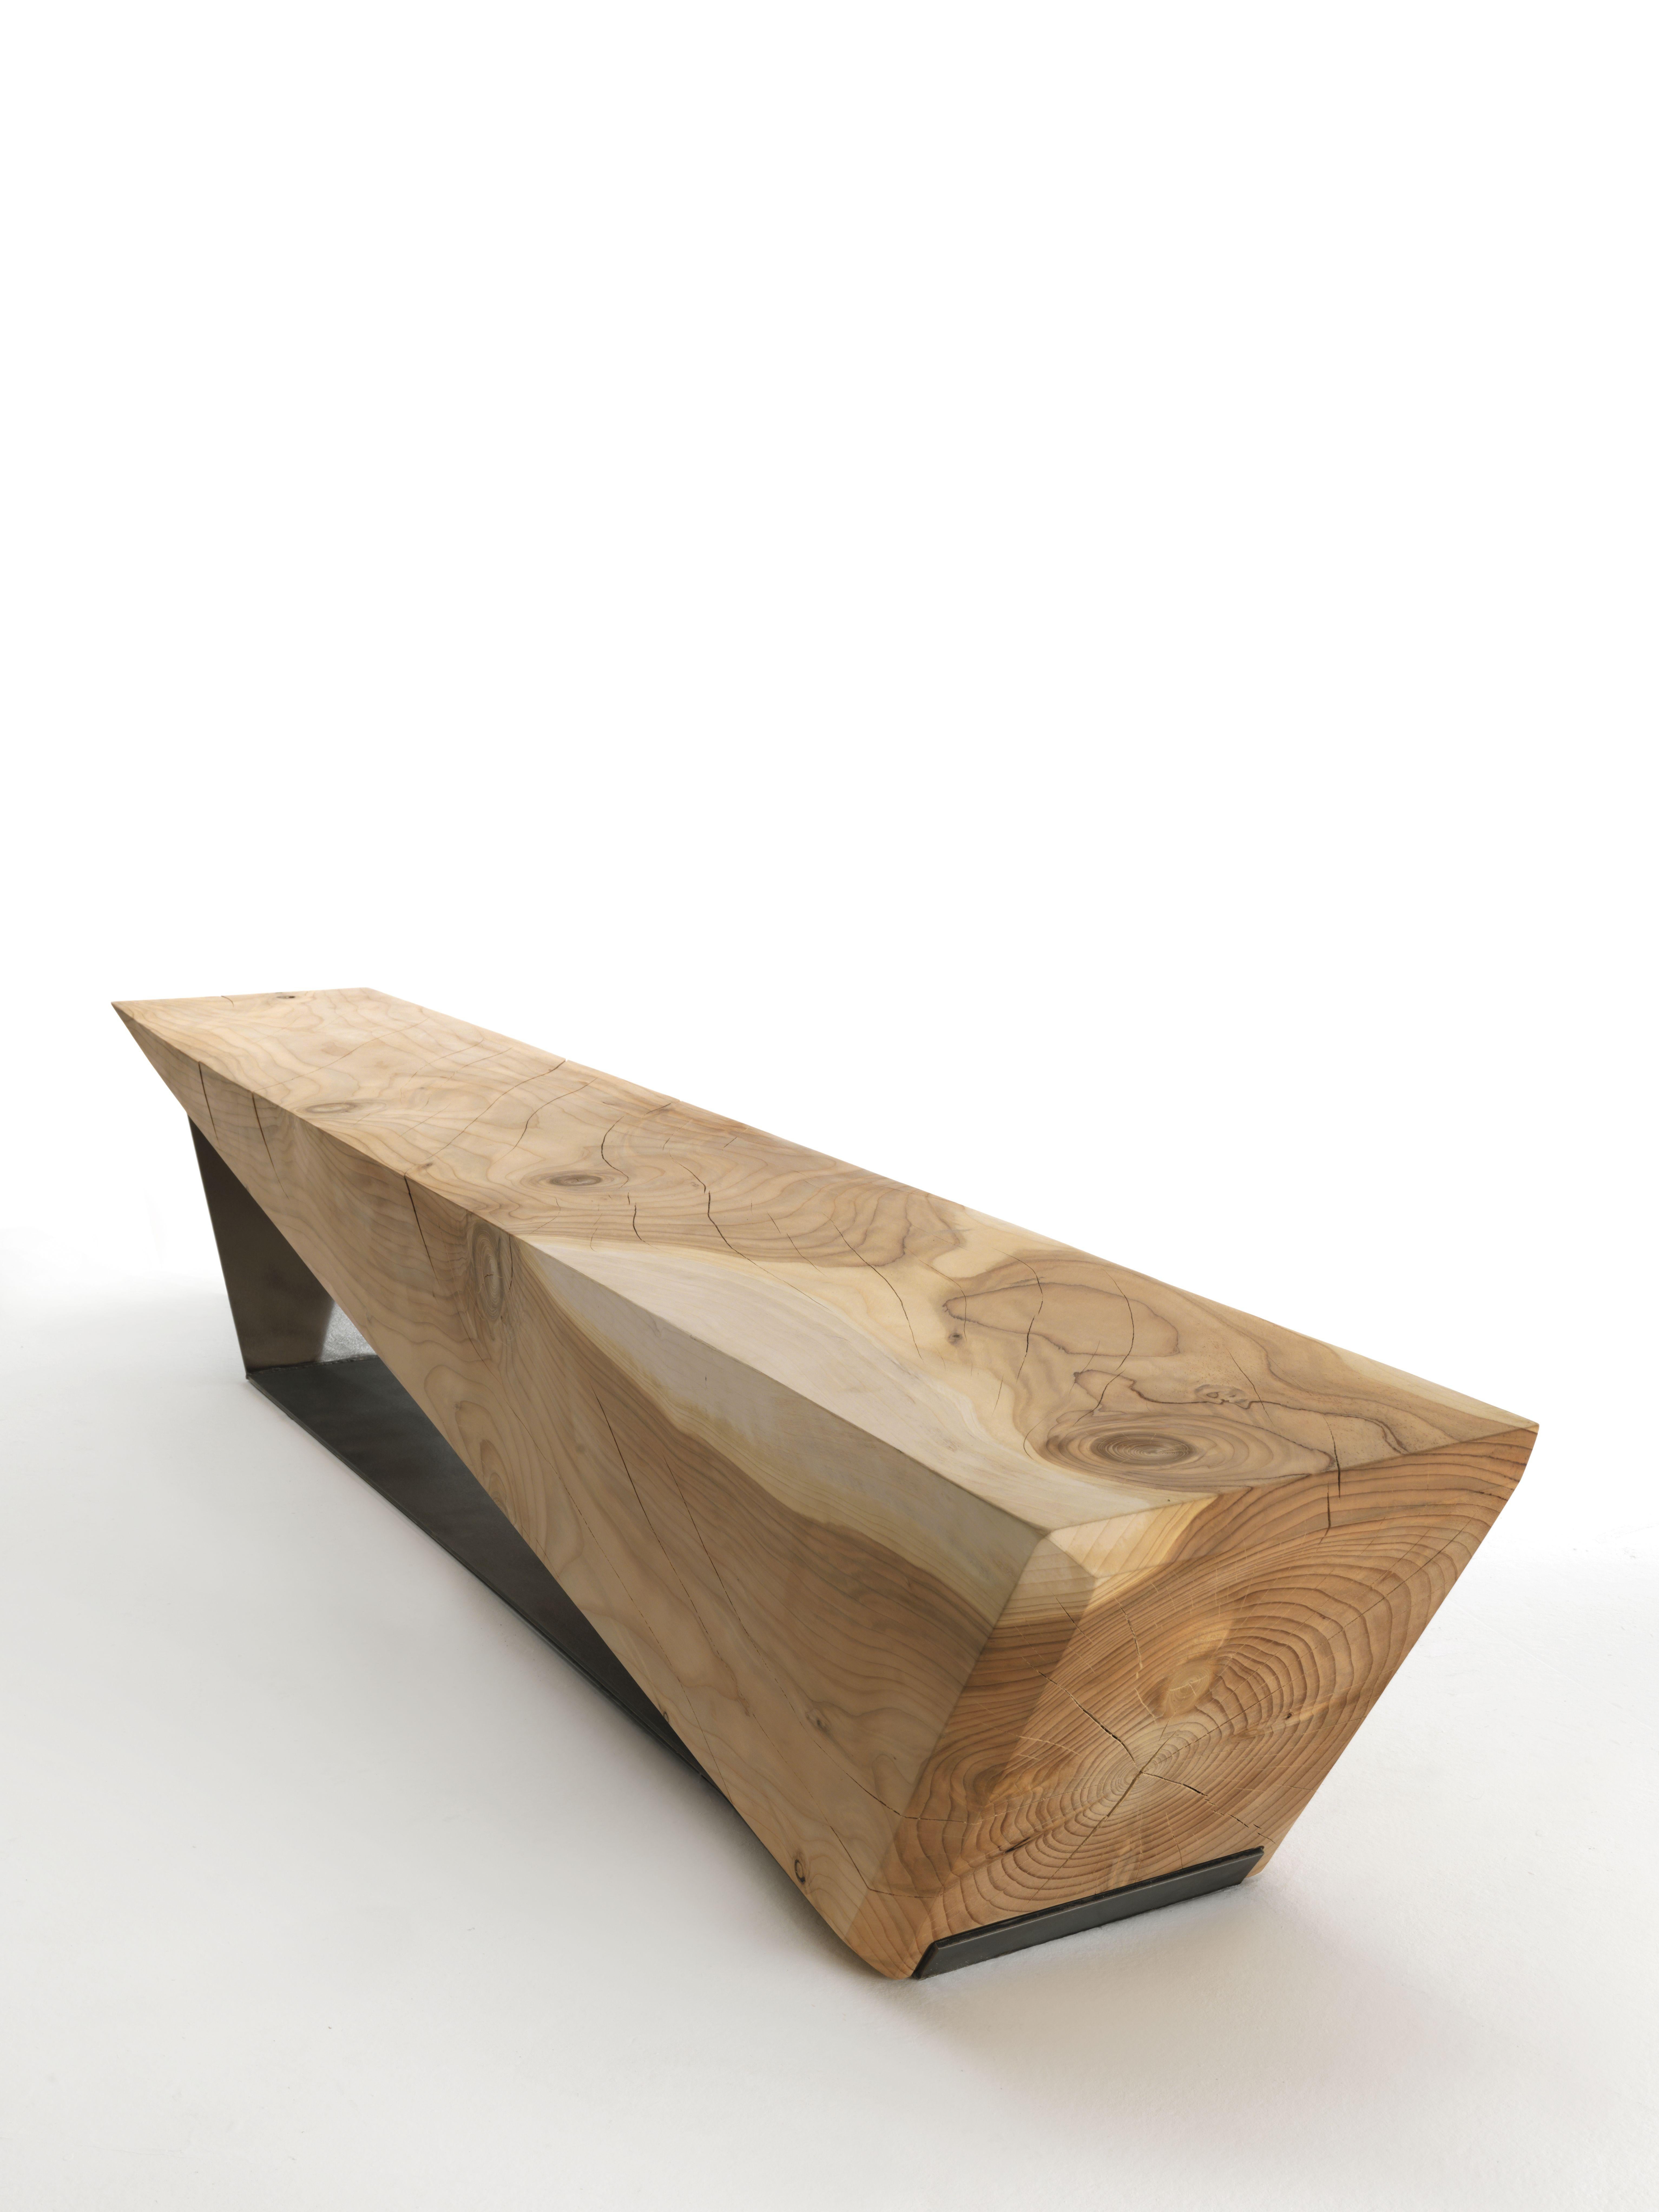 Bench made of a single block of scented cedar with a simple and linear geometrical shape that continues in the metallic base, which can be used as a container.